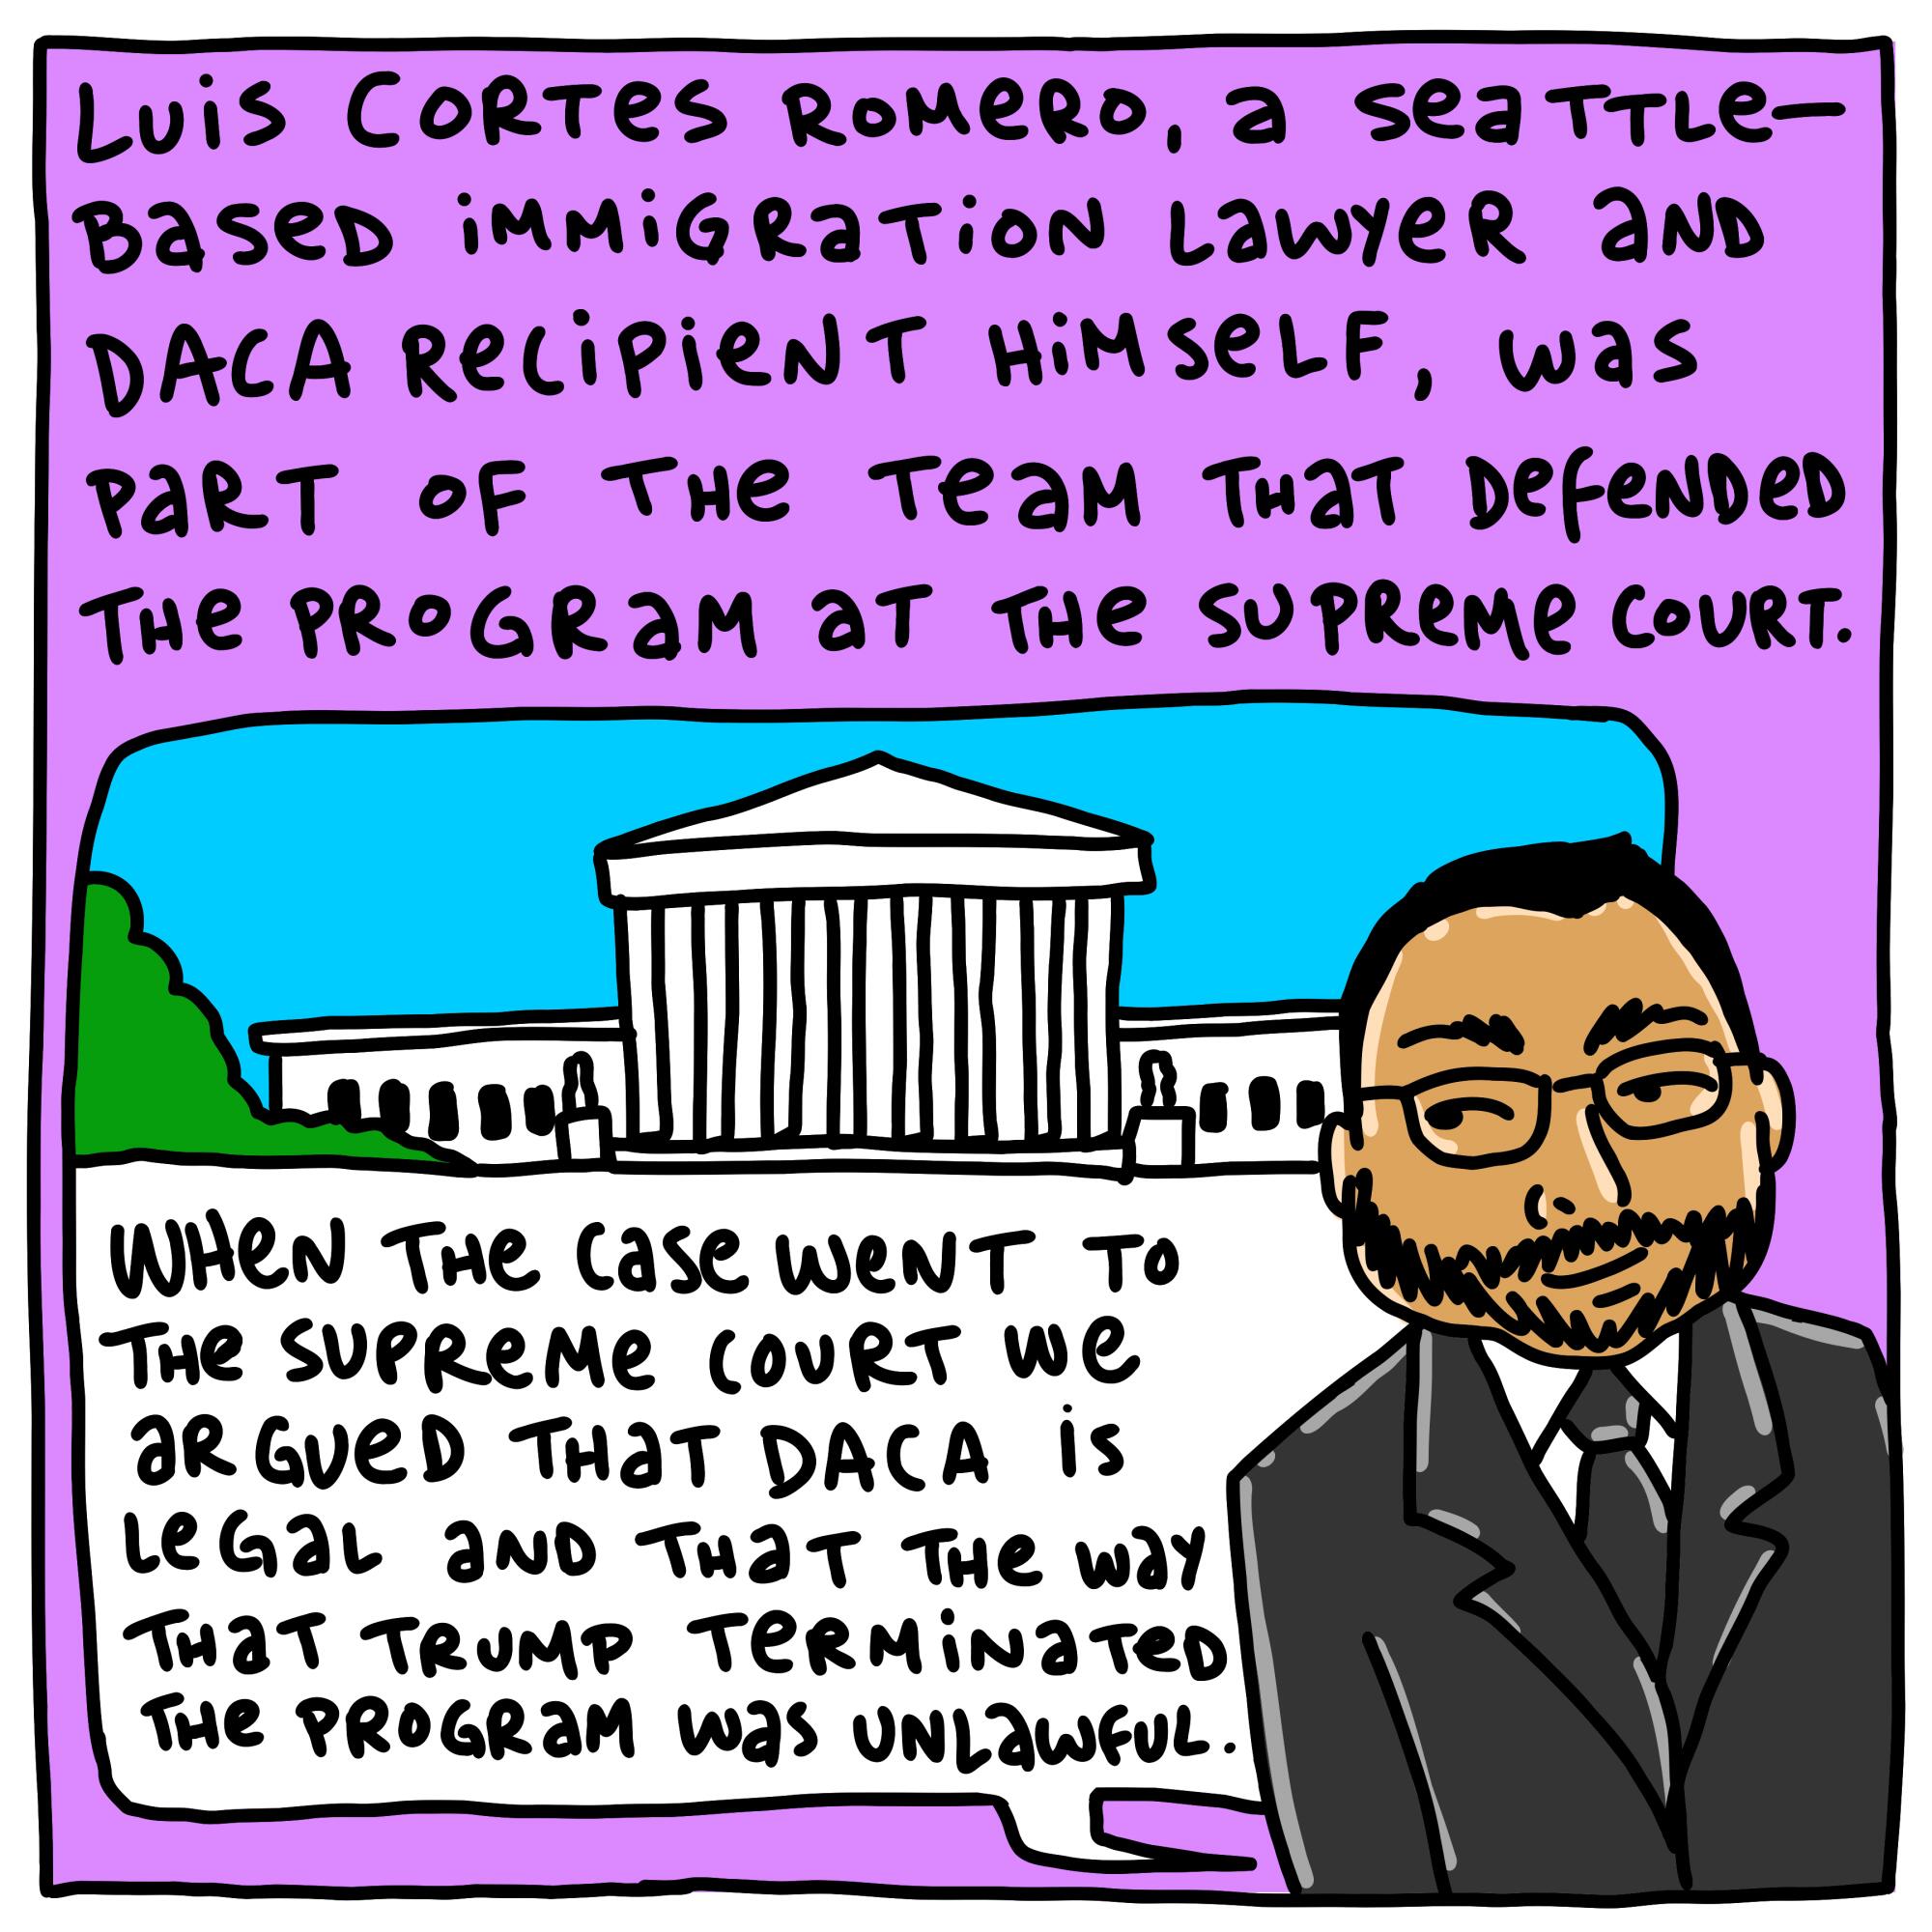 Luis Cortes Romero, an immigrant lawyer and DACA recipient, was part of the team that defended the case.